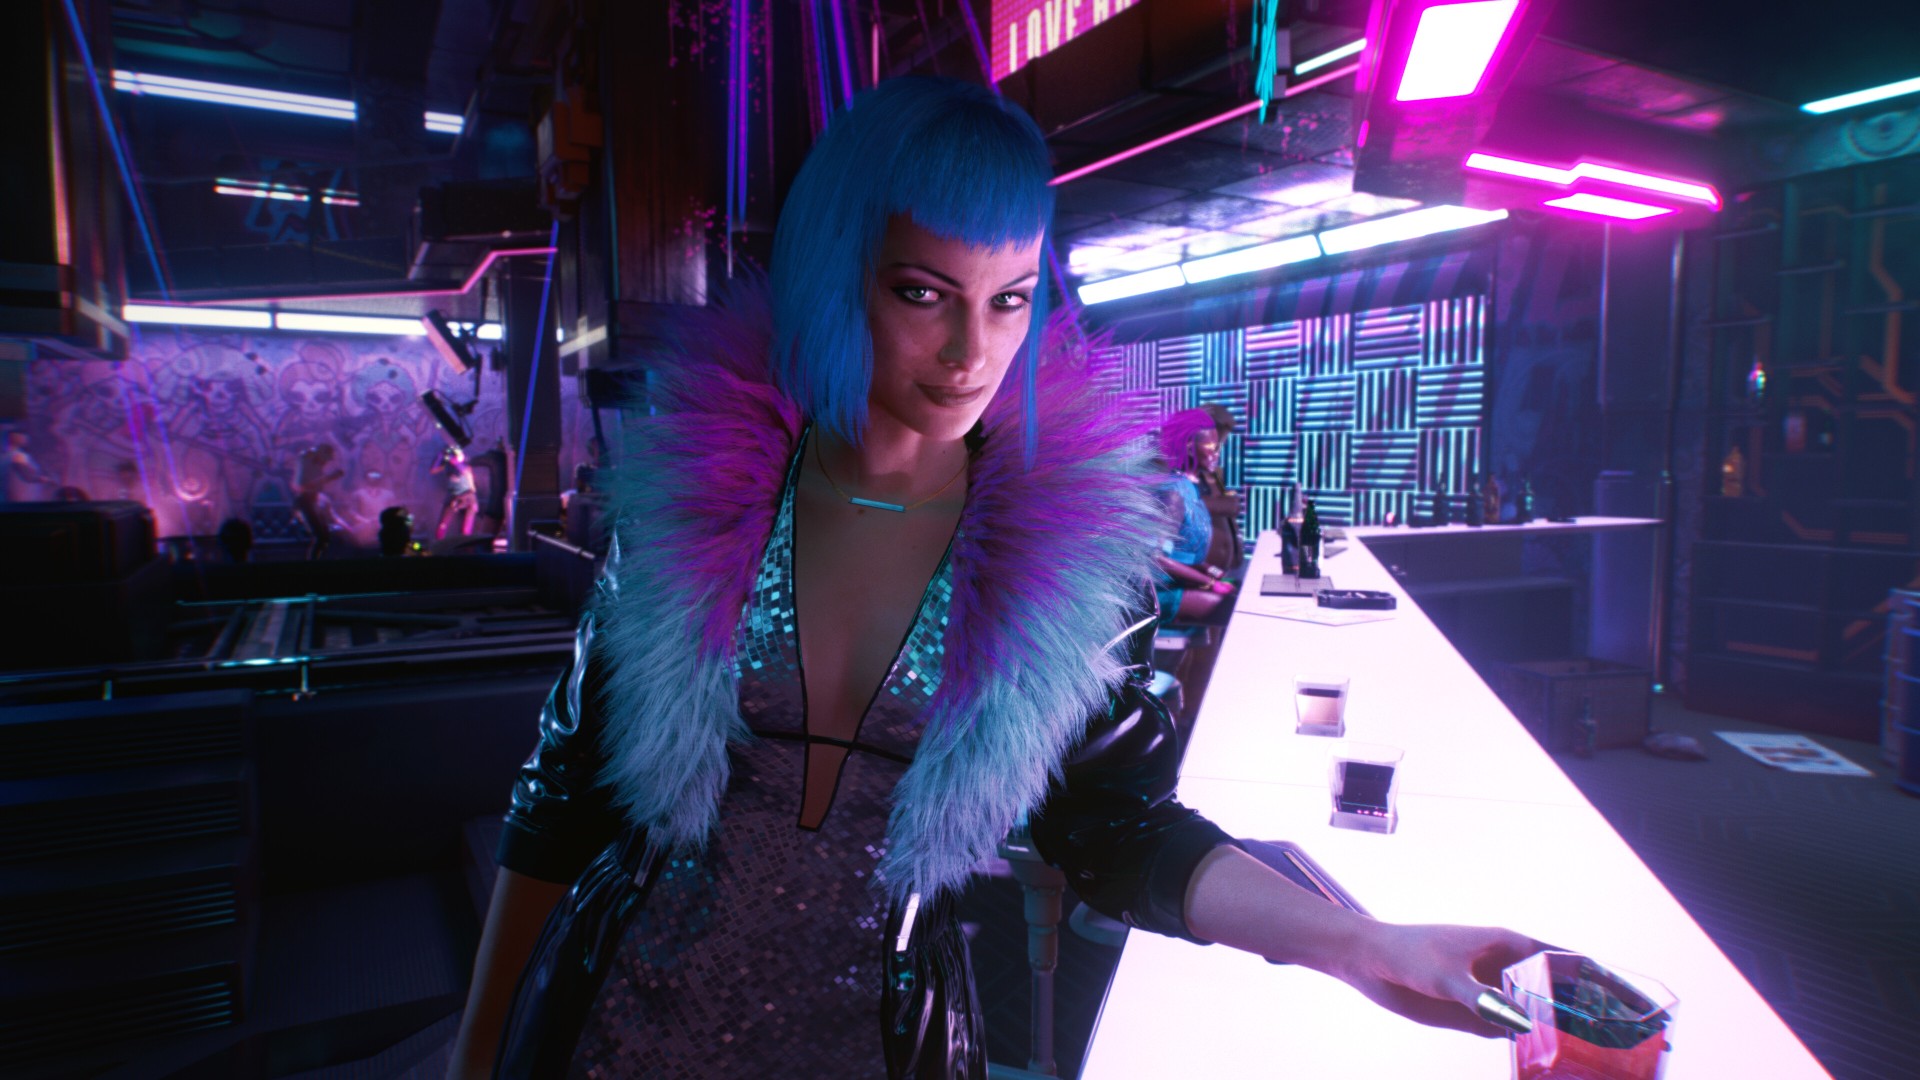 Cyberpunk 2077 CDPR – A woman with blue hair and a pink outfit stands in a bar in the CDPR Cyberpunk 2077 RPG